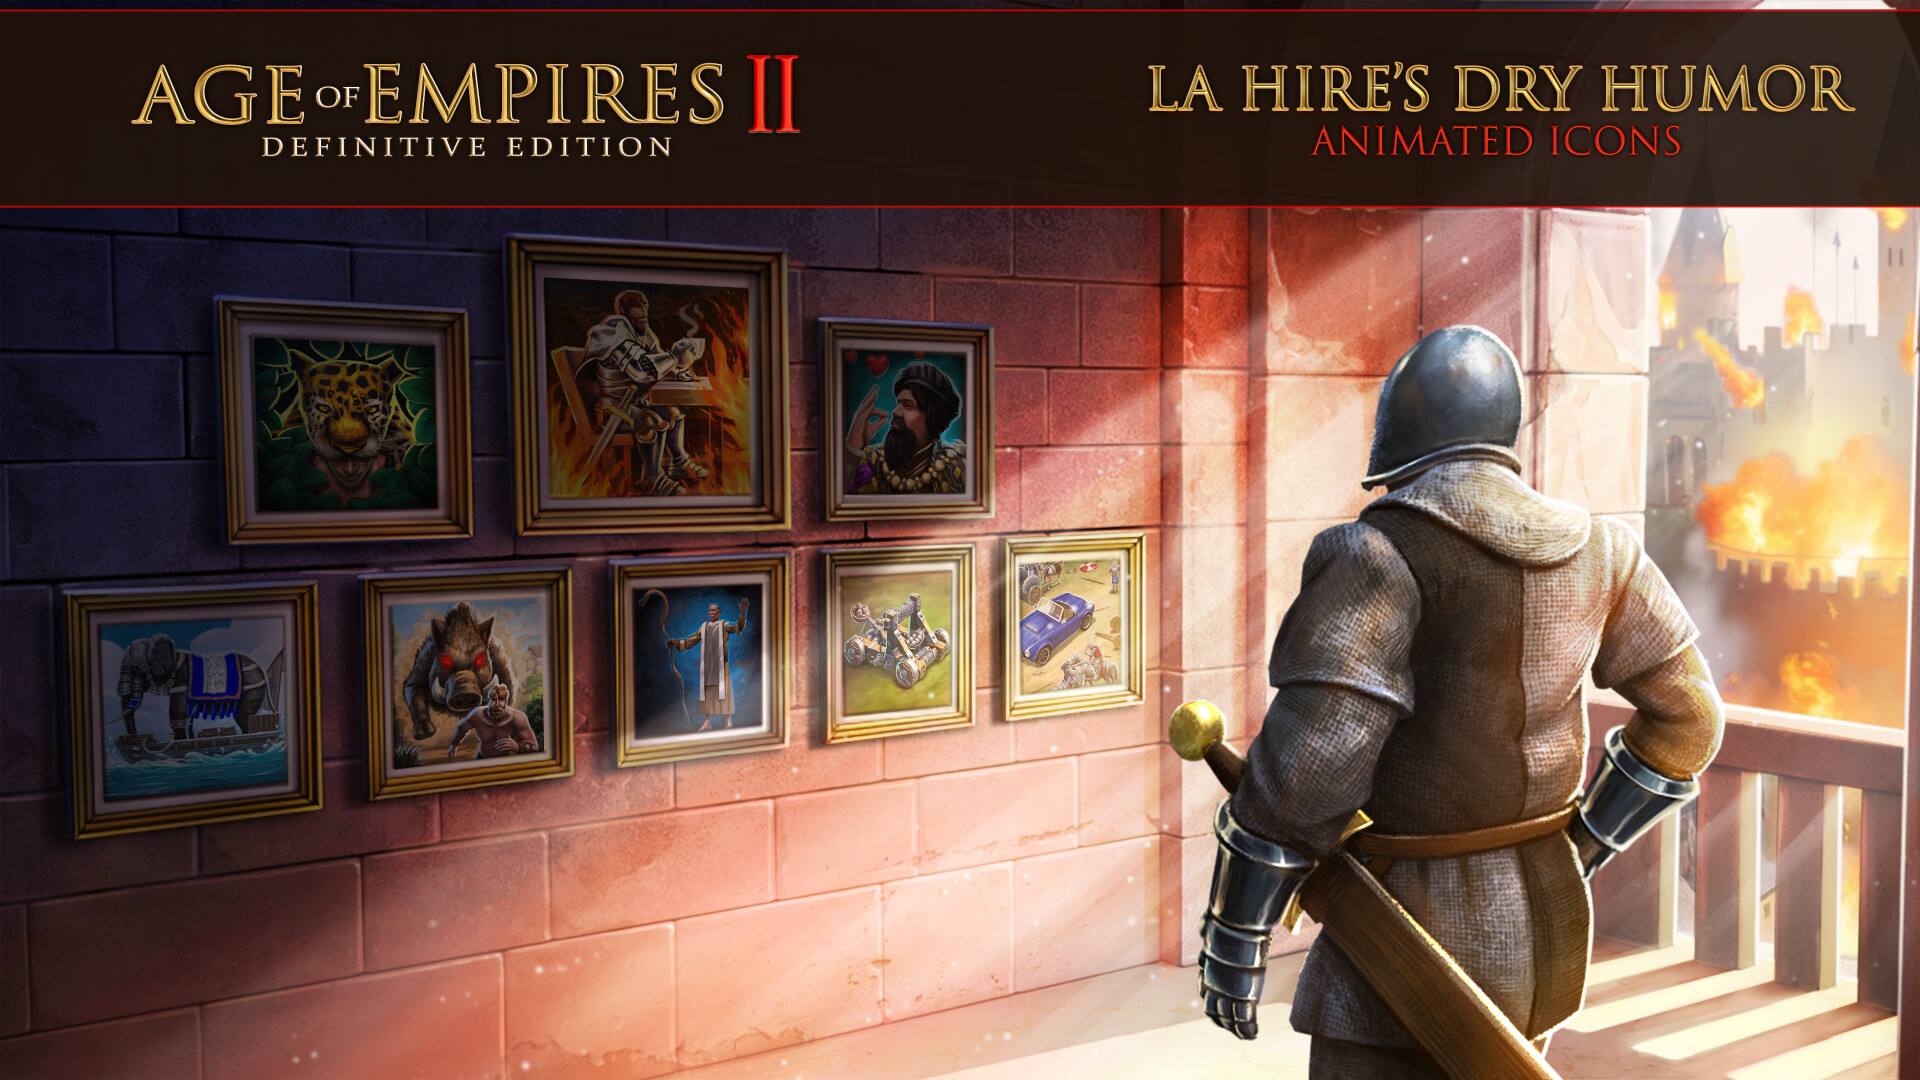 Age of Empires II: Definitive Edition – La Hire’s Dry Humor Animated Icons Featured Screenshot #1